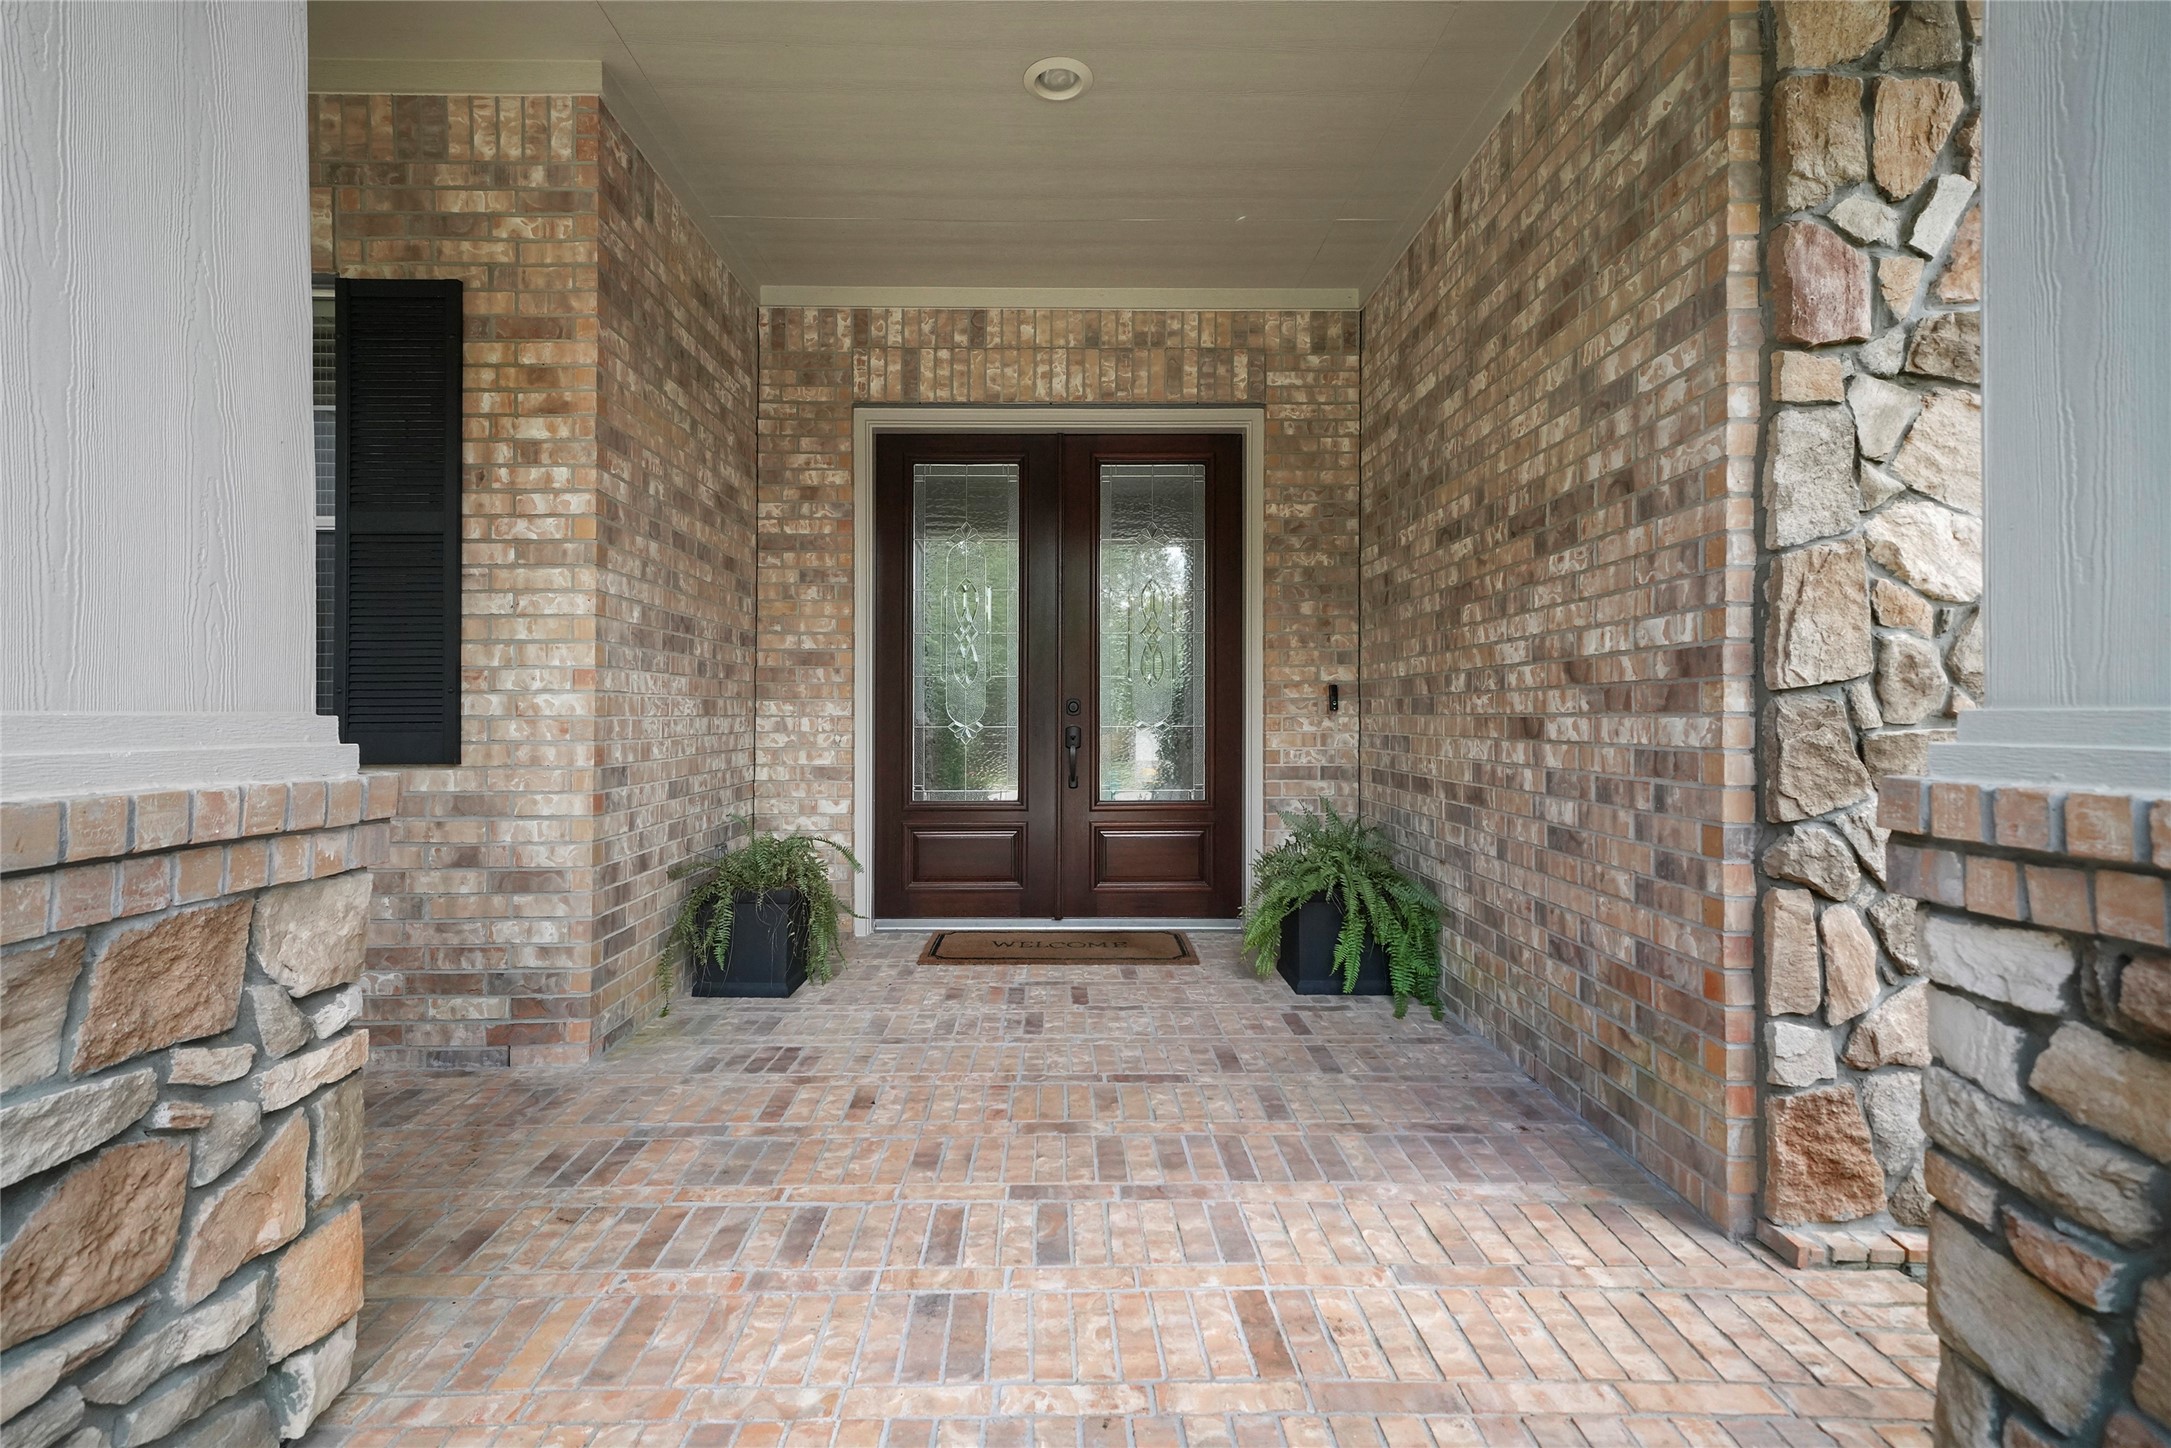 Guests are welcomed by a deep, covered, French door entry with inlaid leaded glass.